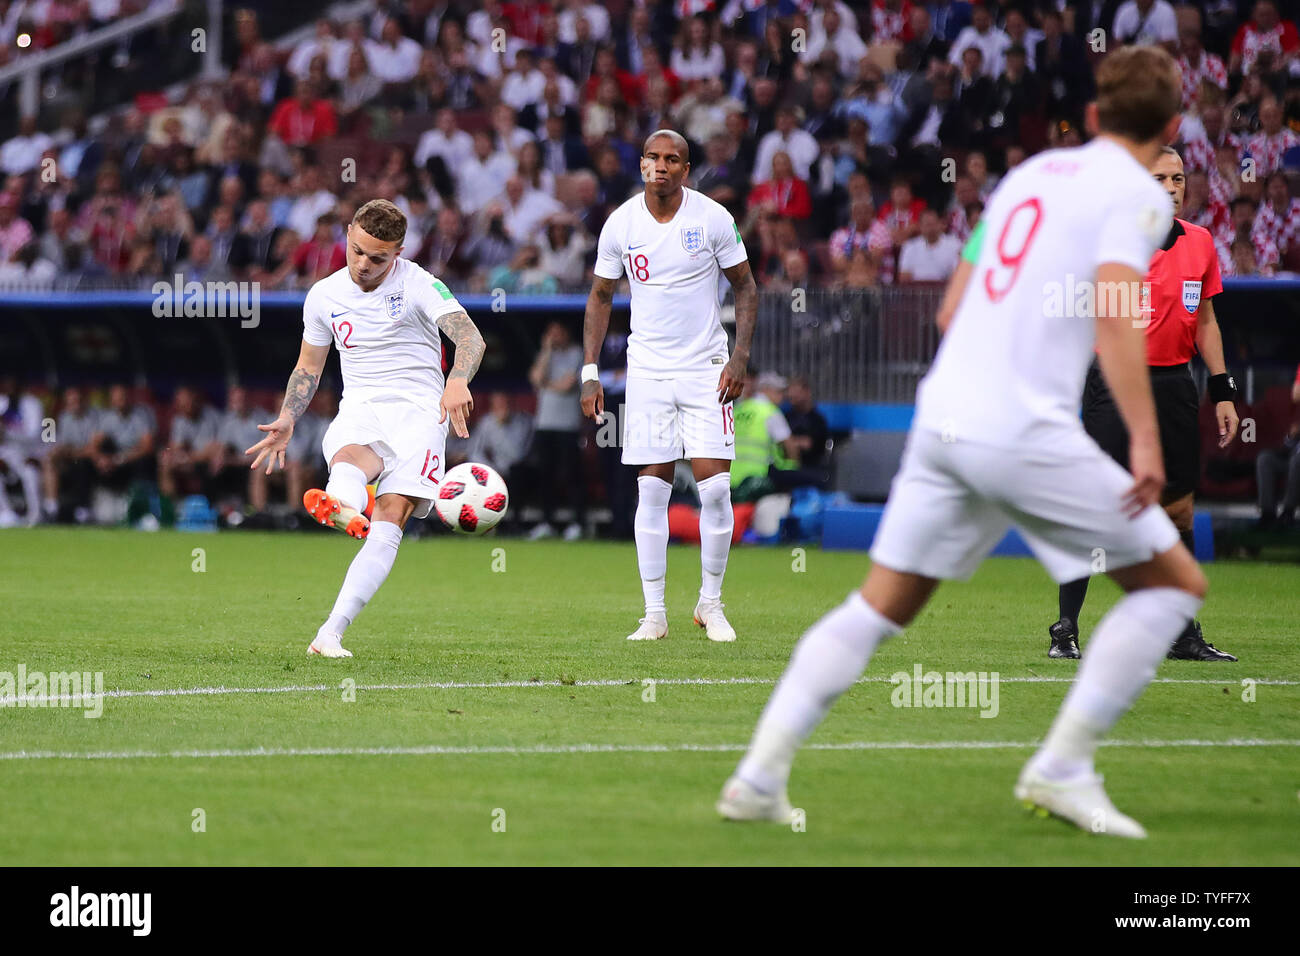 Kieran Trippier of England scores the opening goal during the 2018 FIFA World Cup semi-final match at Luzhniki Stadium in Moscow, Russia on July 11, 2018. Croatia beat England 2-1 to qualify for the final. Photo by Chris Brunskill/UPI Stock Photo